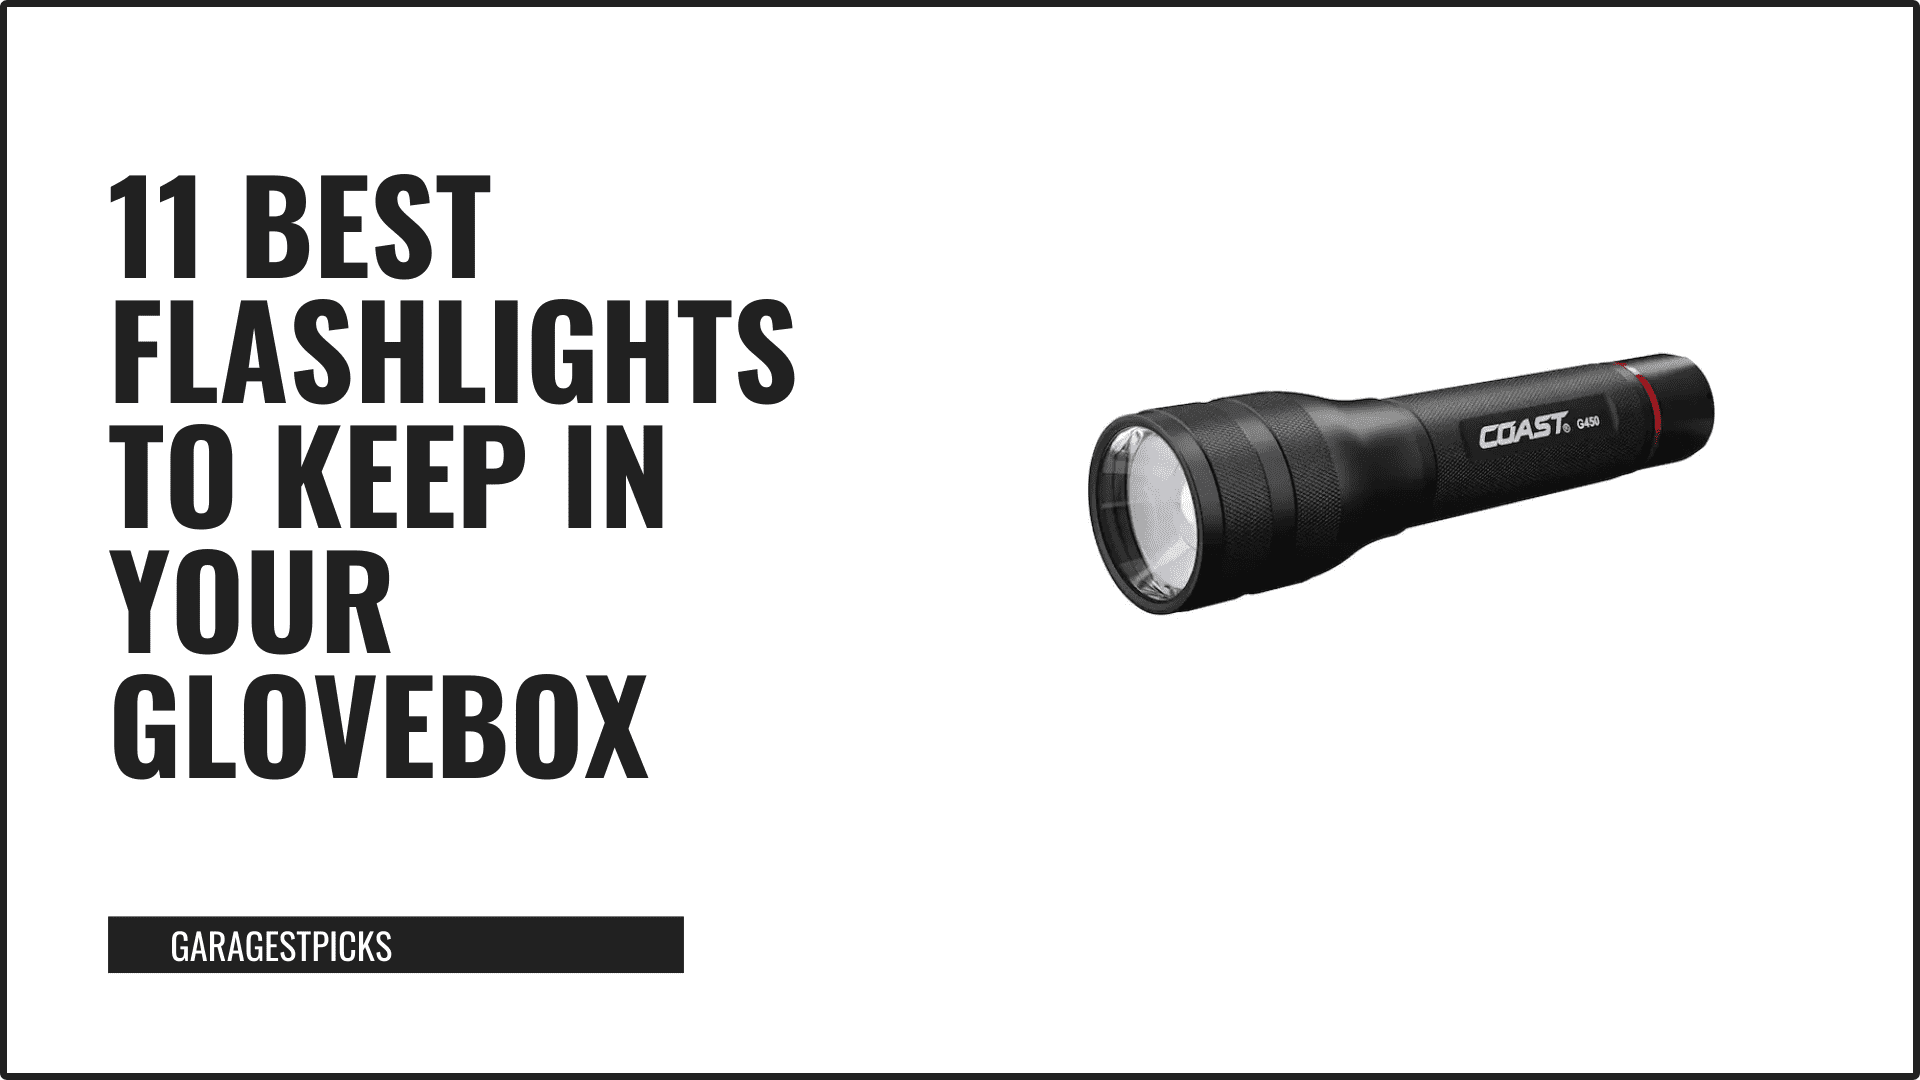 11 best flashlights to keep in your glovebox in black text on white background with image of flashlight